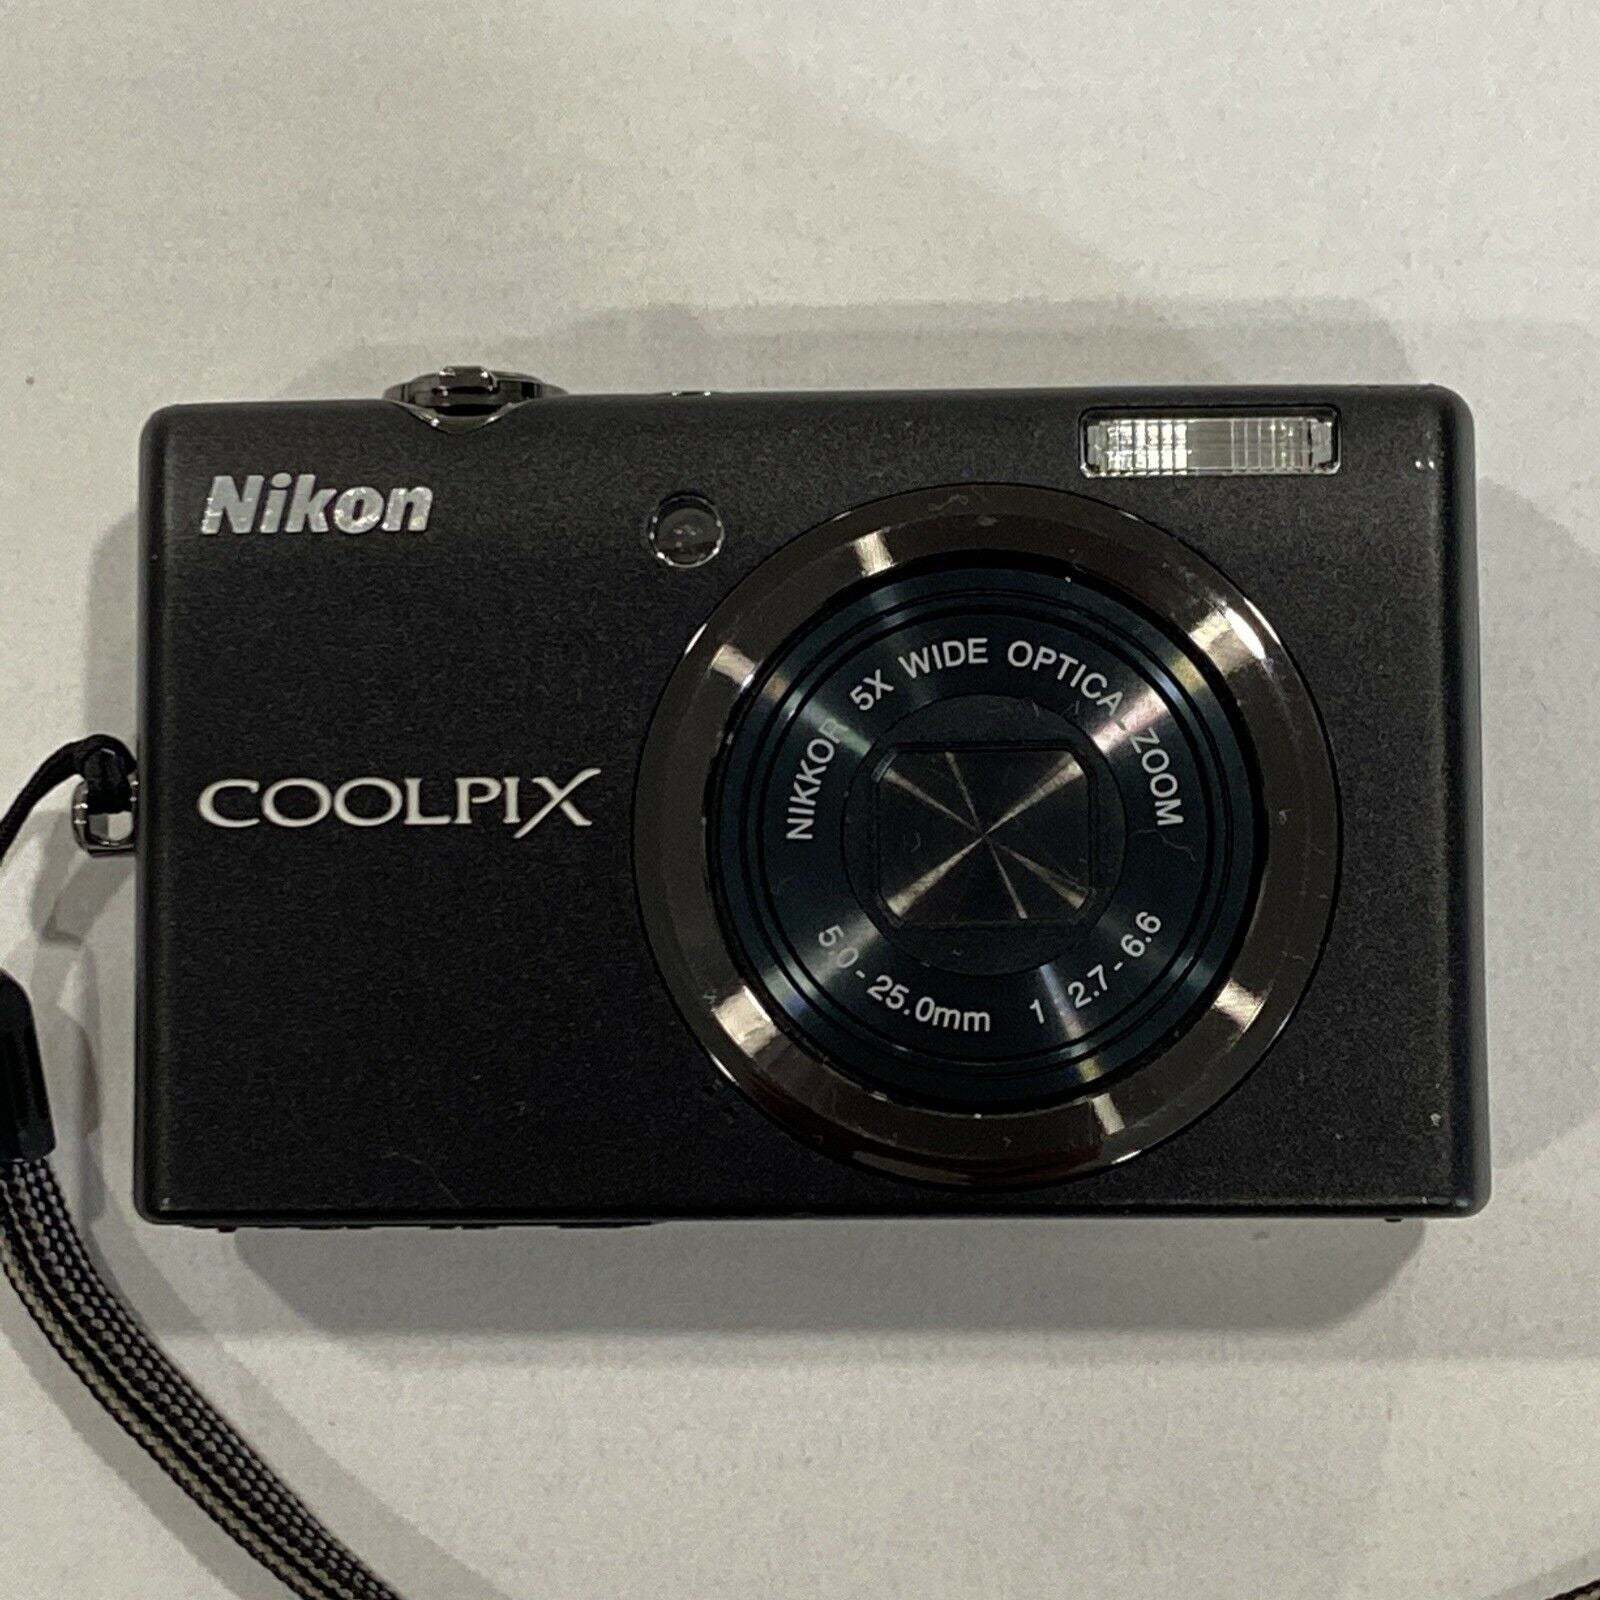 Primary image for NIKON CoolPix S570 12.0MP 5x Optical Zoom Digital Camera